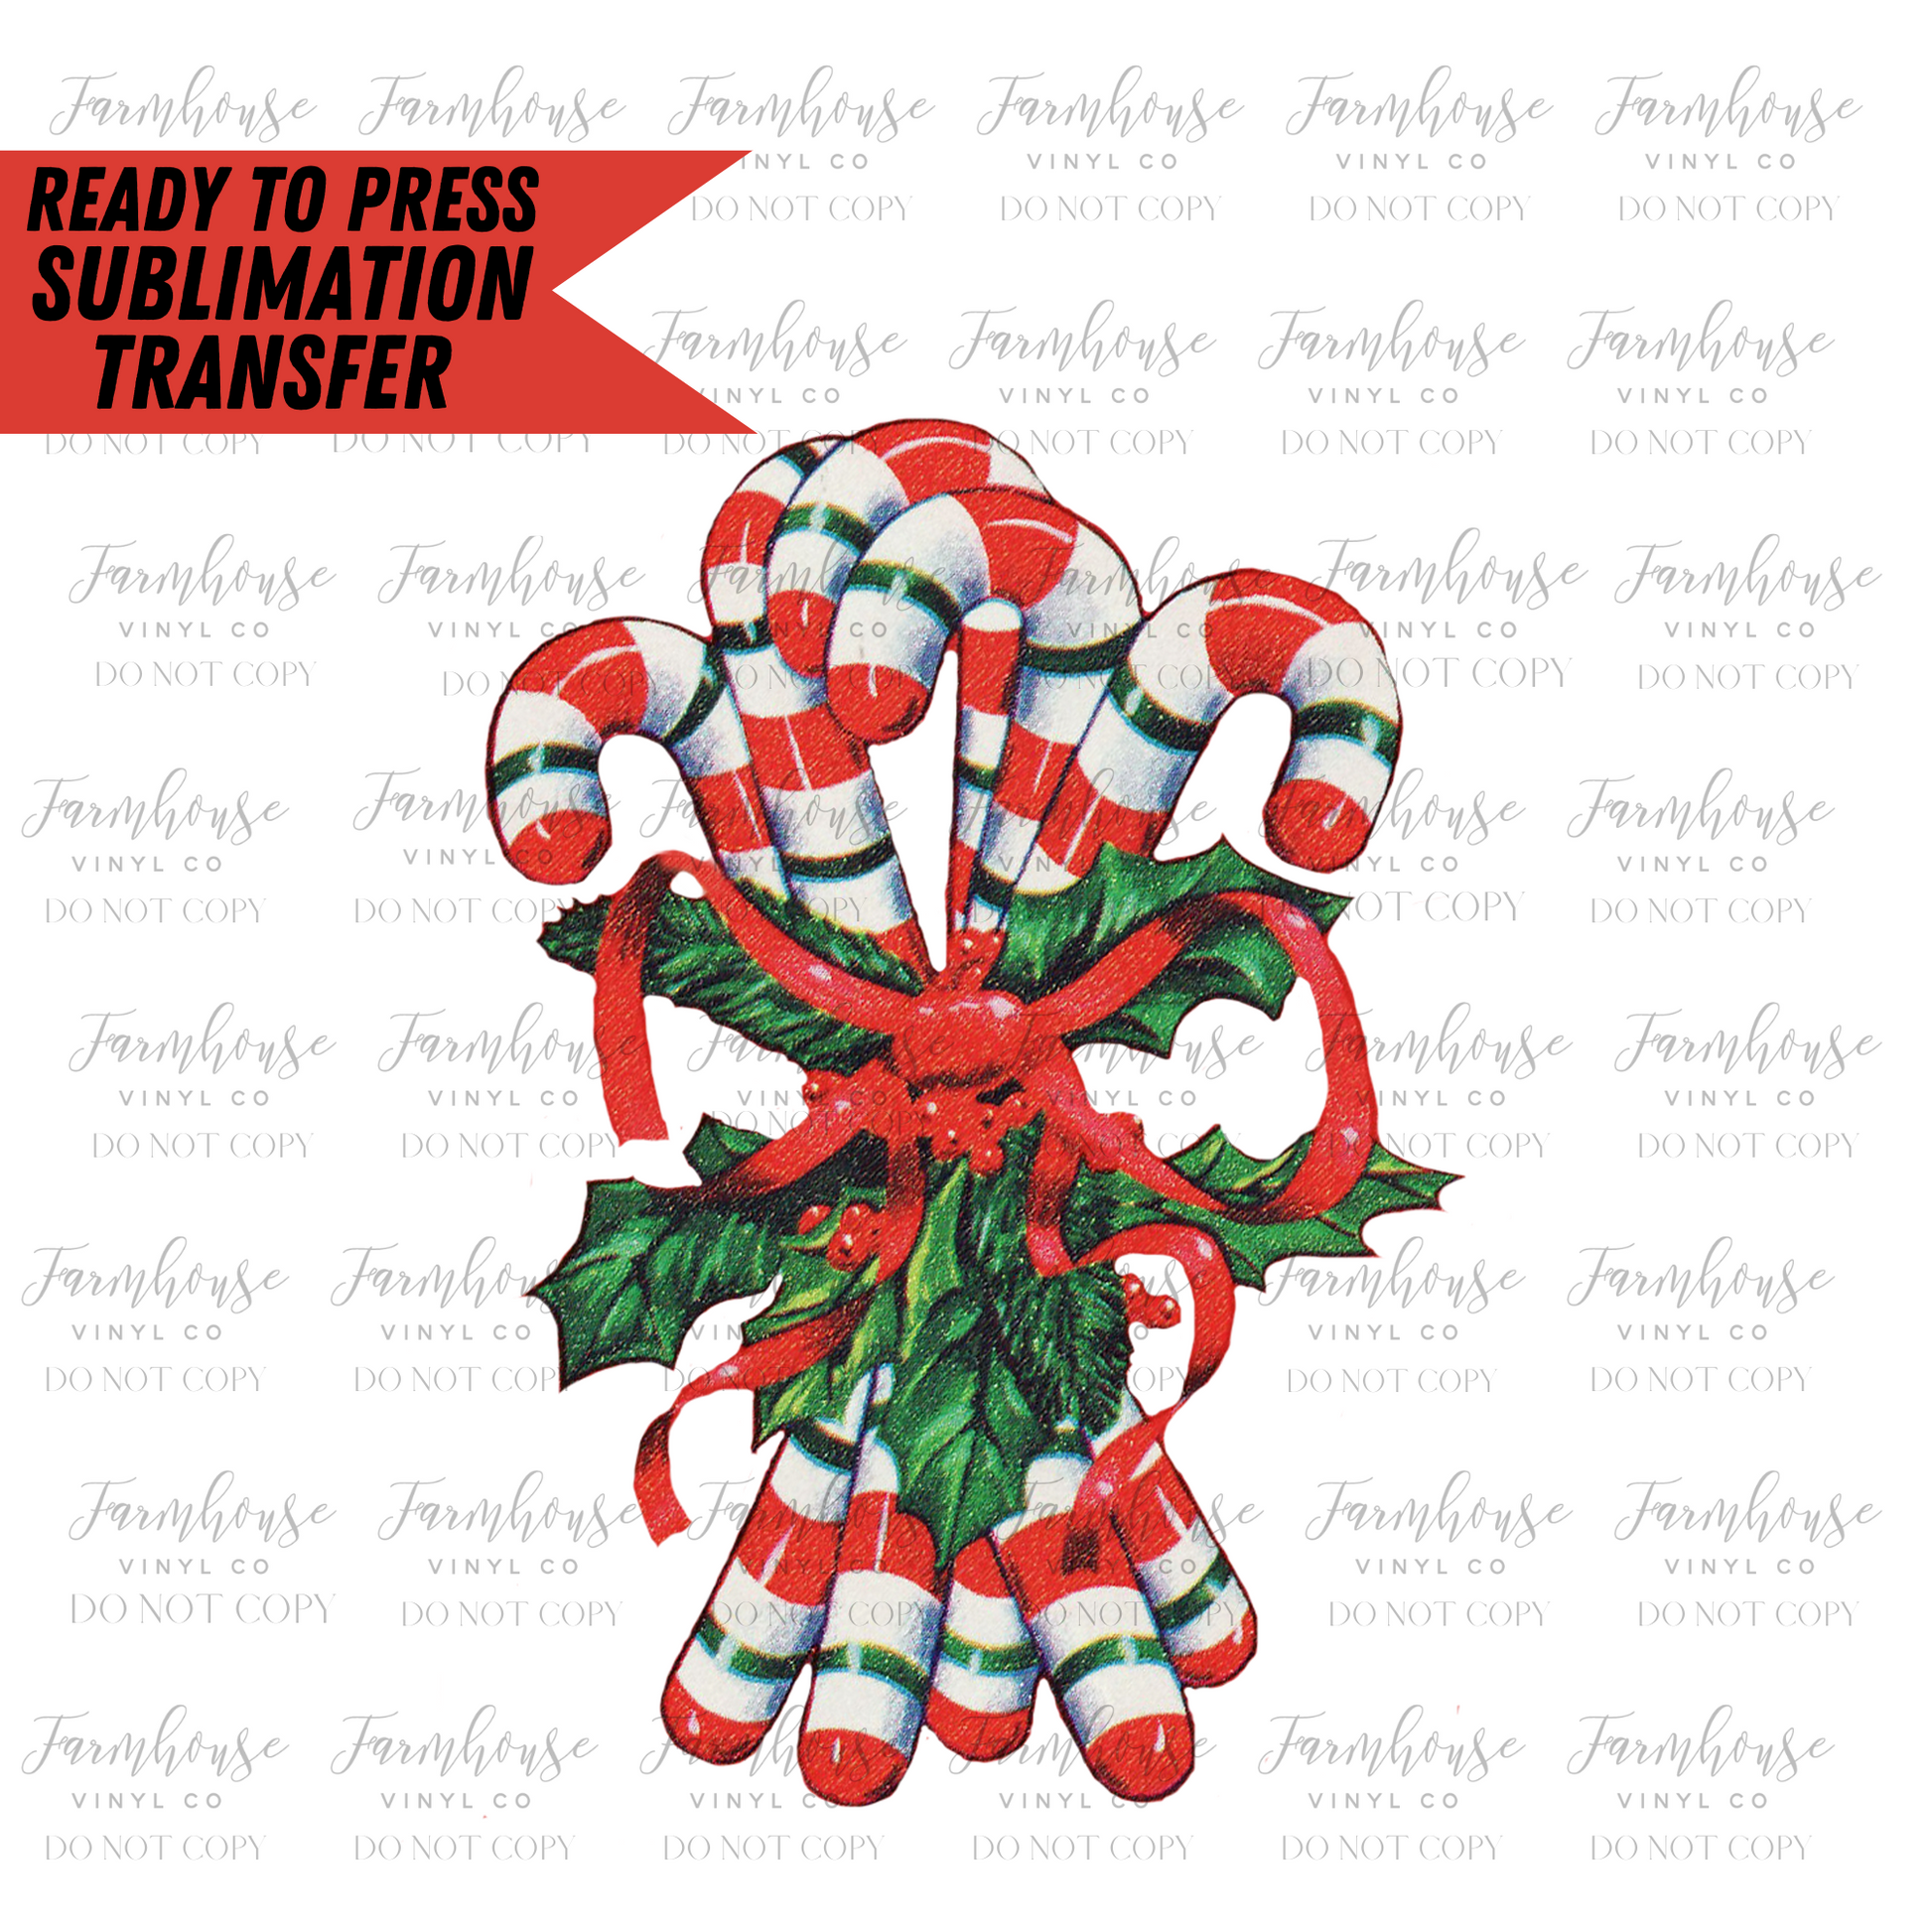 Candy Canes Vintage Ready To Press Sublimation Transfer - Farmhouse Vinyl Co